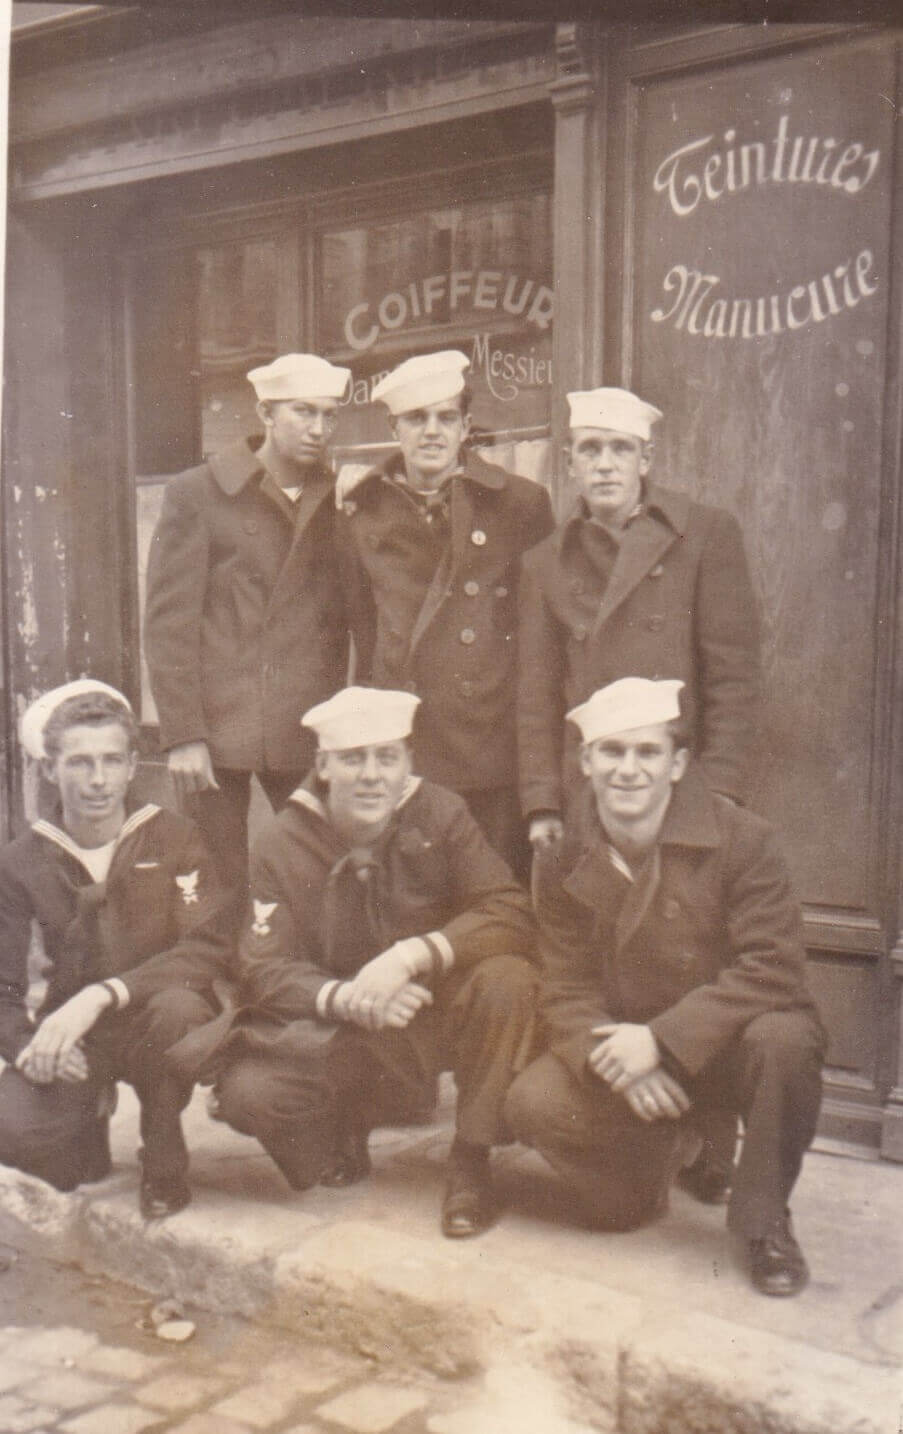 Crew from the Plunkett in Toulon, France, November 1944. The only identified crew member is John Marshall at top center. (credit: Jeanne Marshall)